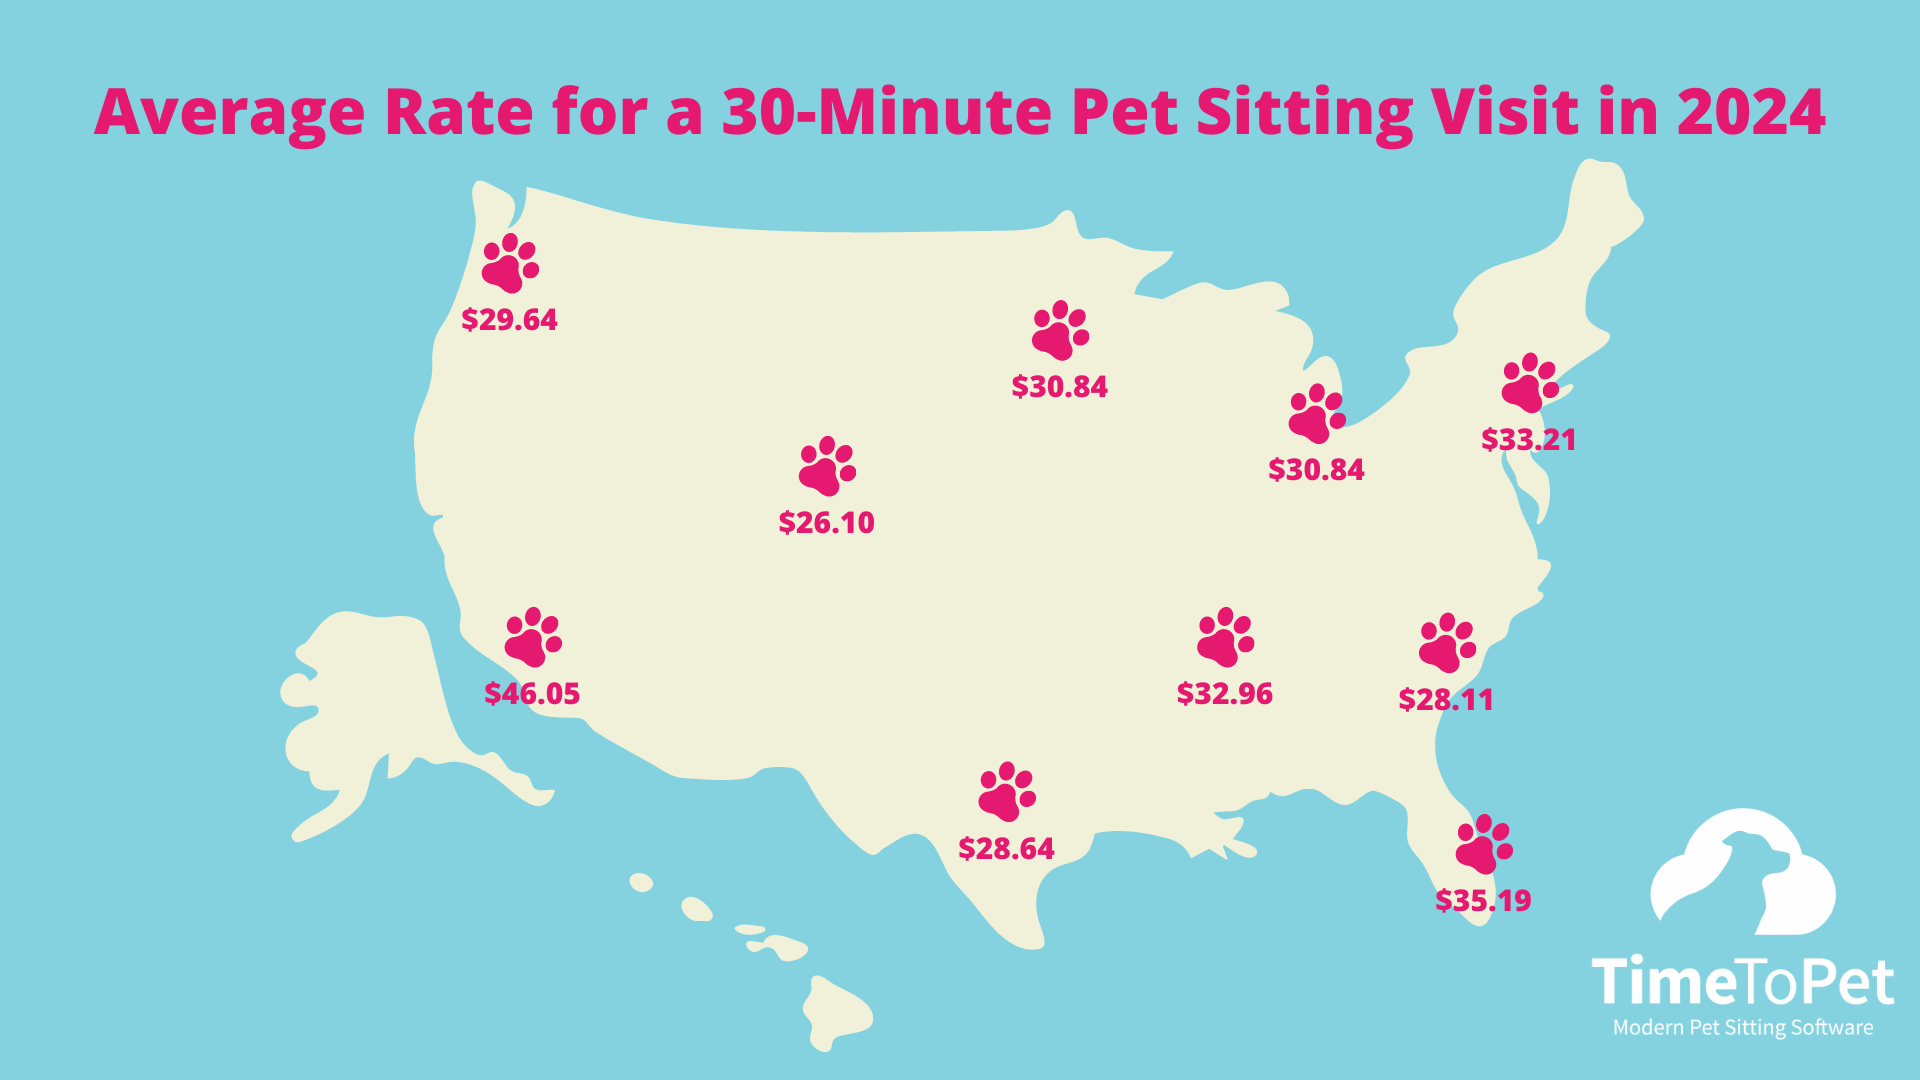 Average%20Rate%20for%20a%2030-Minute%20Pet%20Sitting%20Visit%20in%202024